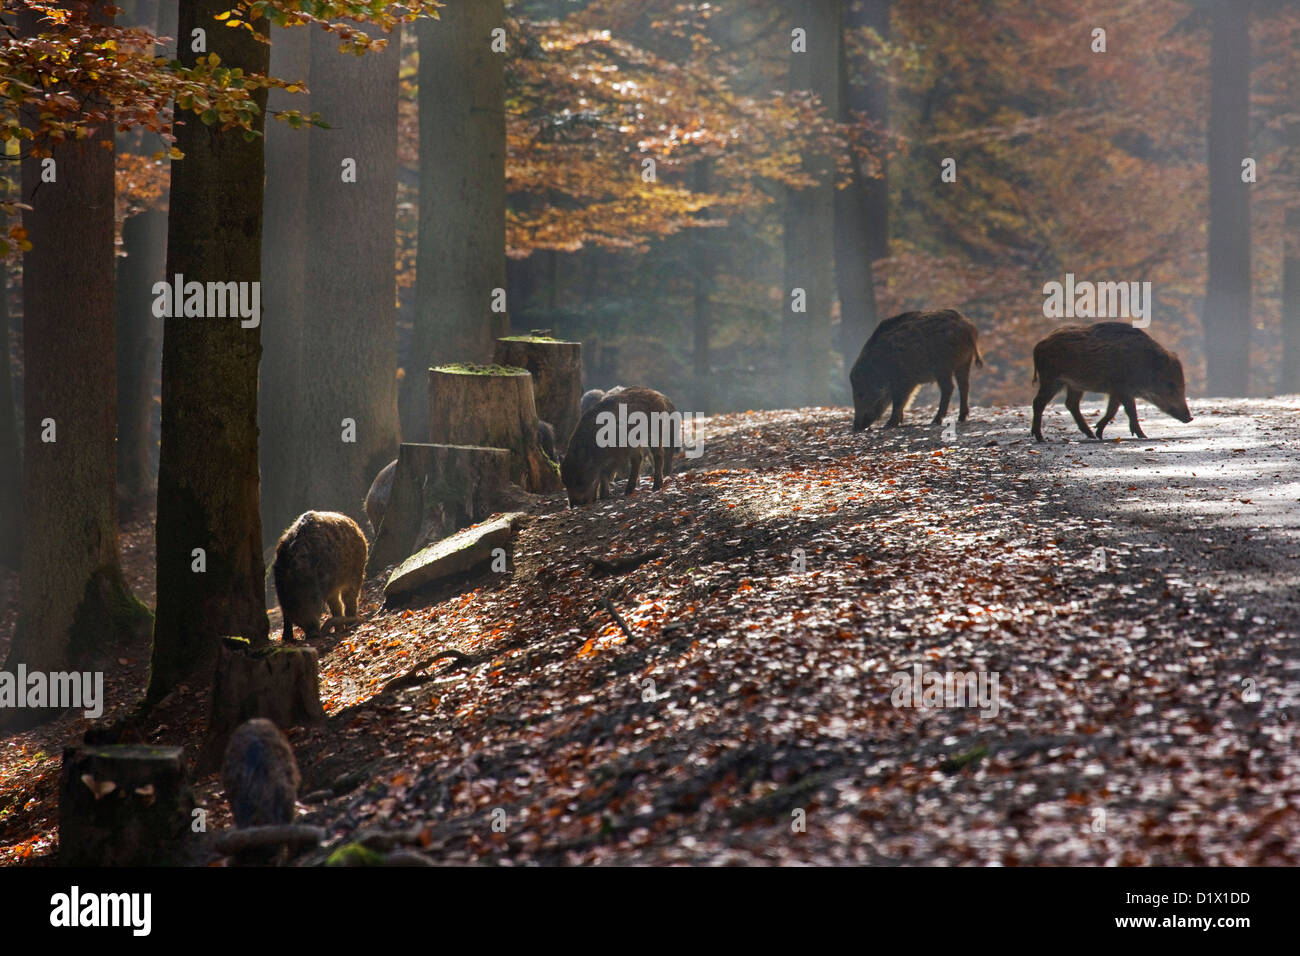 Sounder of wild boars (Sus scrofa) foraging in autumn forest in the Belgian Ardennes, Belgium Stock Photo